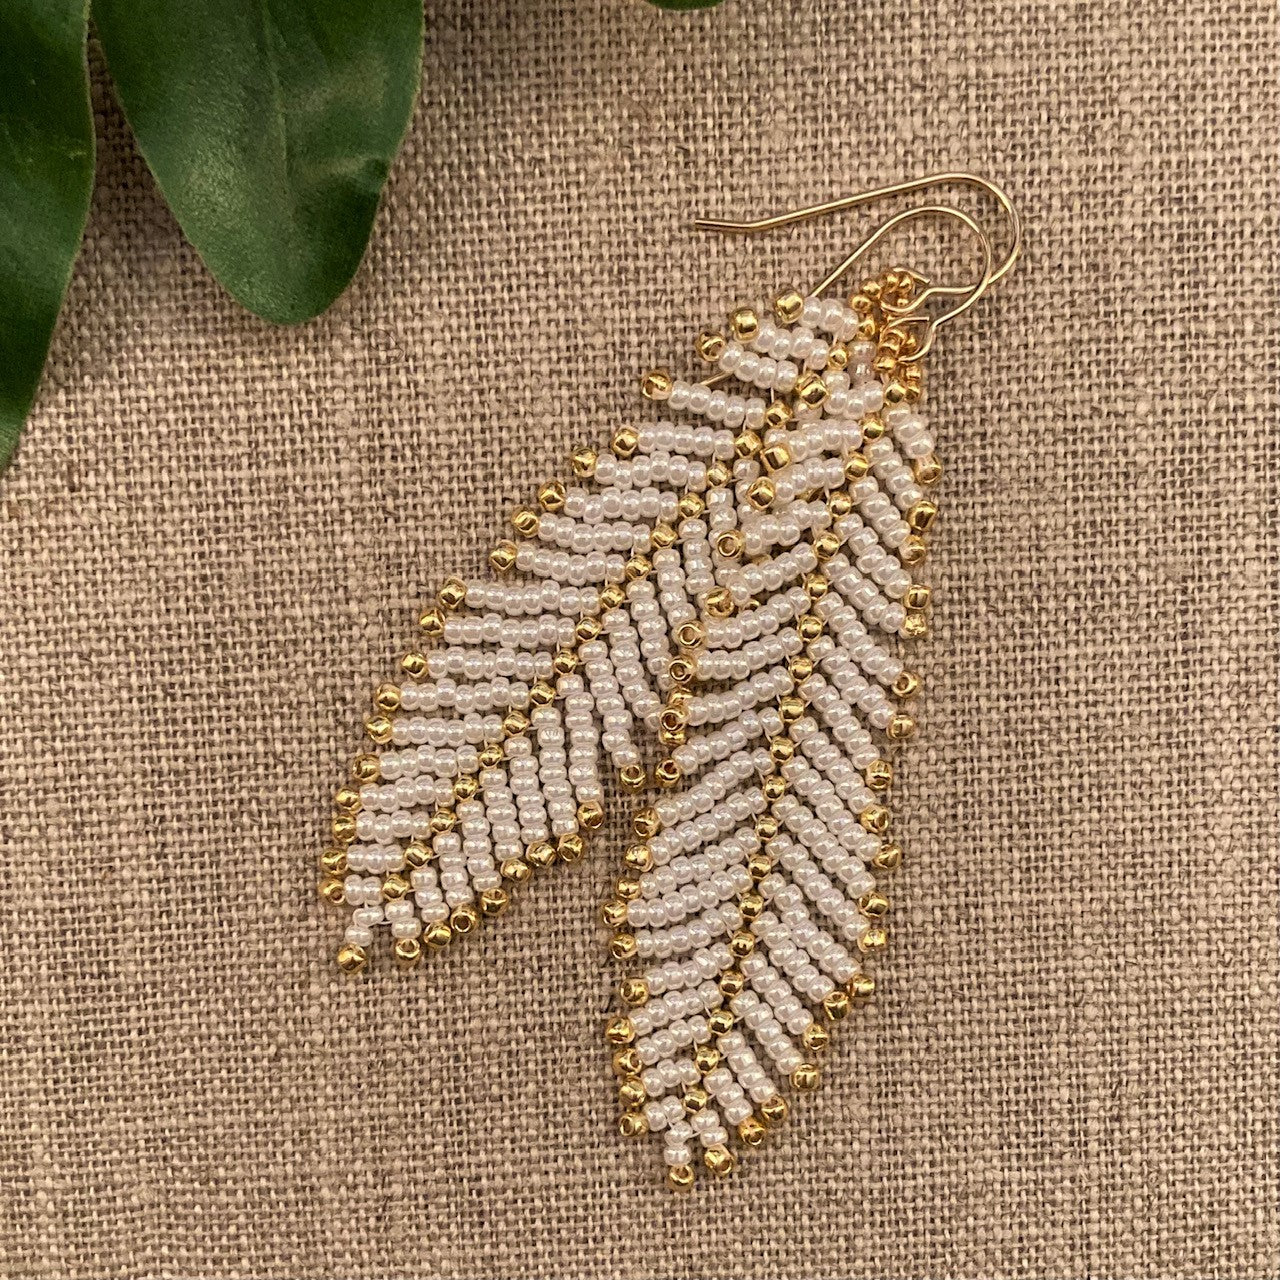 Feather Leaf Seed Bead Earrings Pearl White Bridal Summer destination Party Beach Wedding Gold 14K gold filled resort lightweight Beaded By The Beach handmade USA